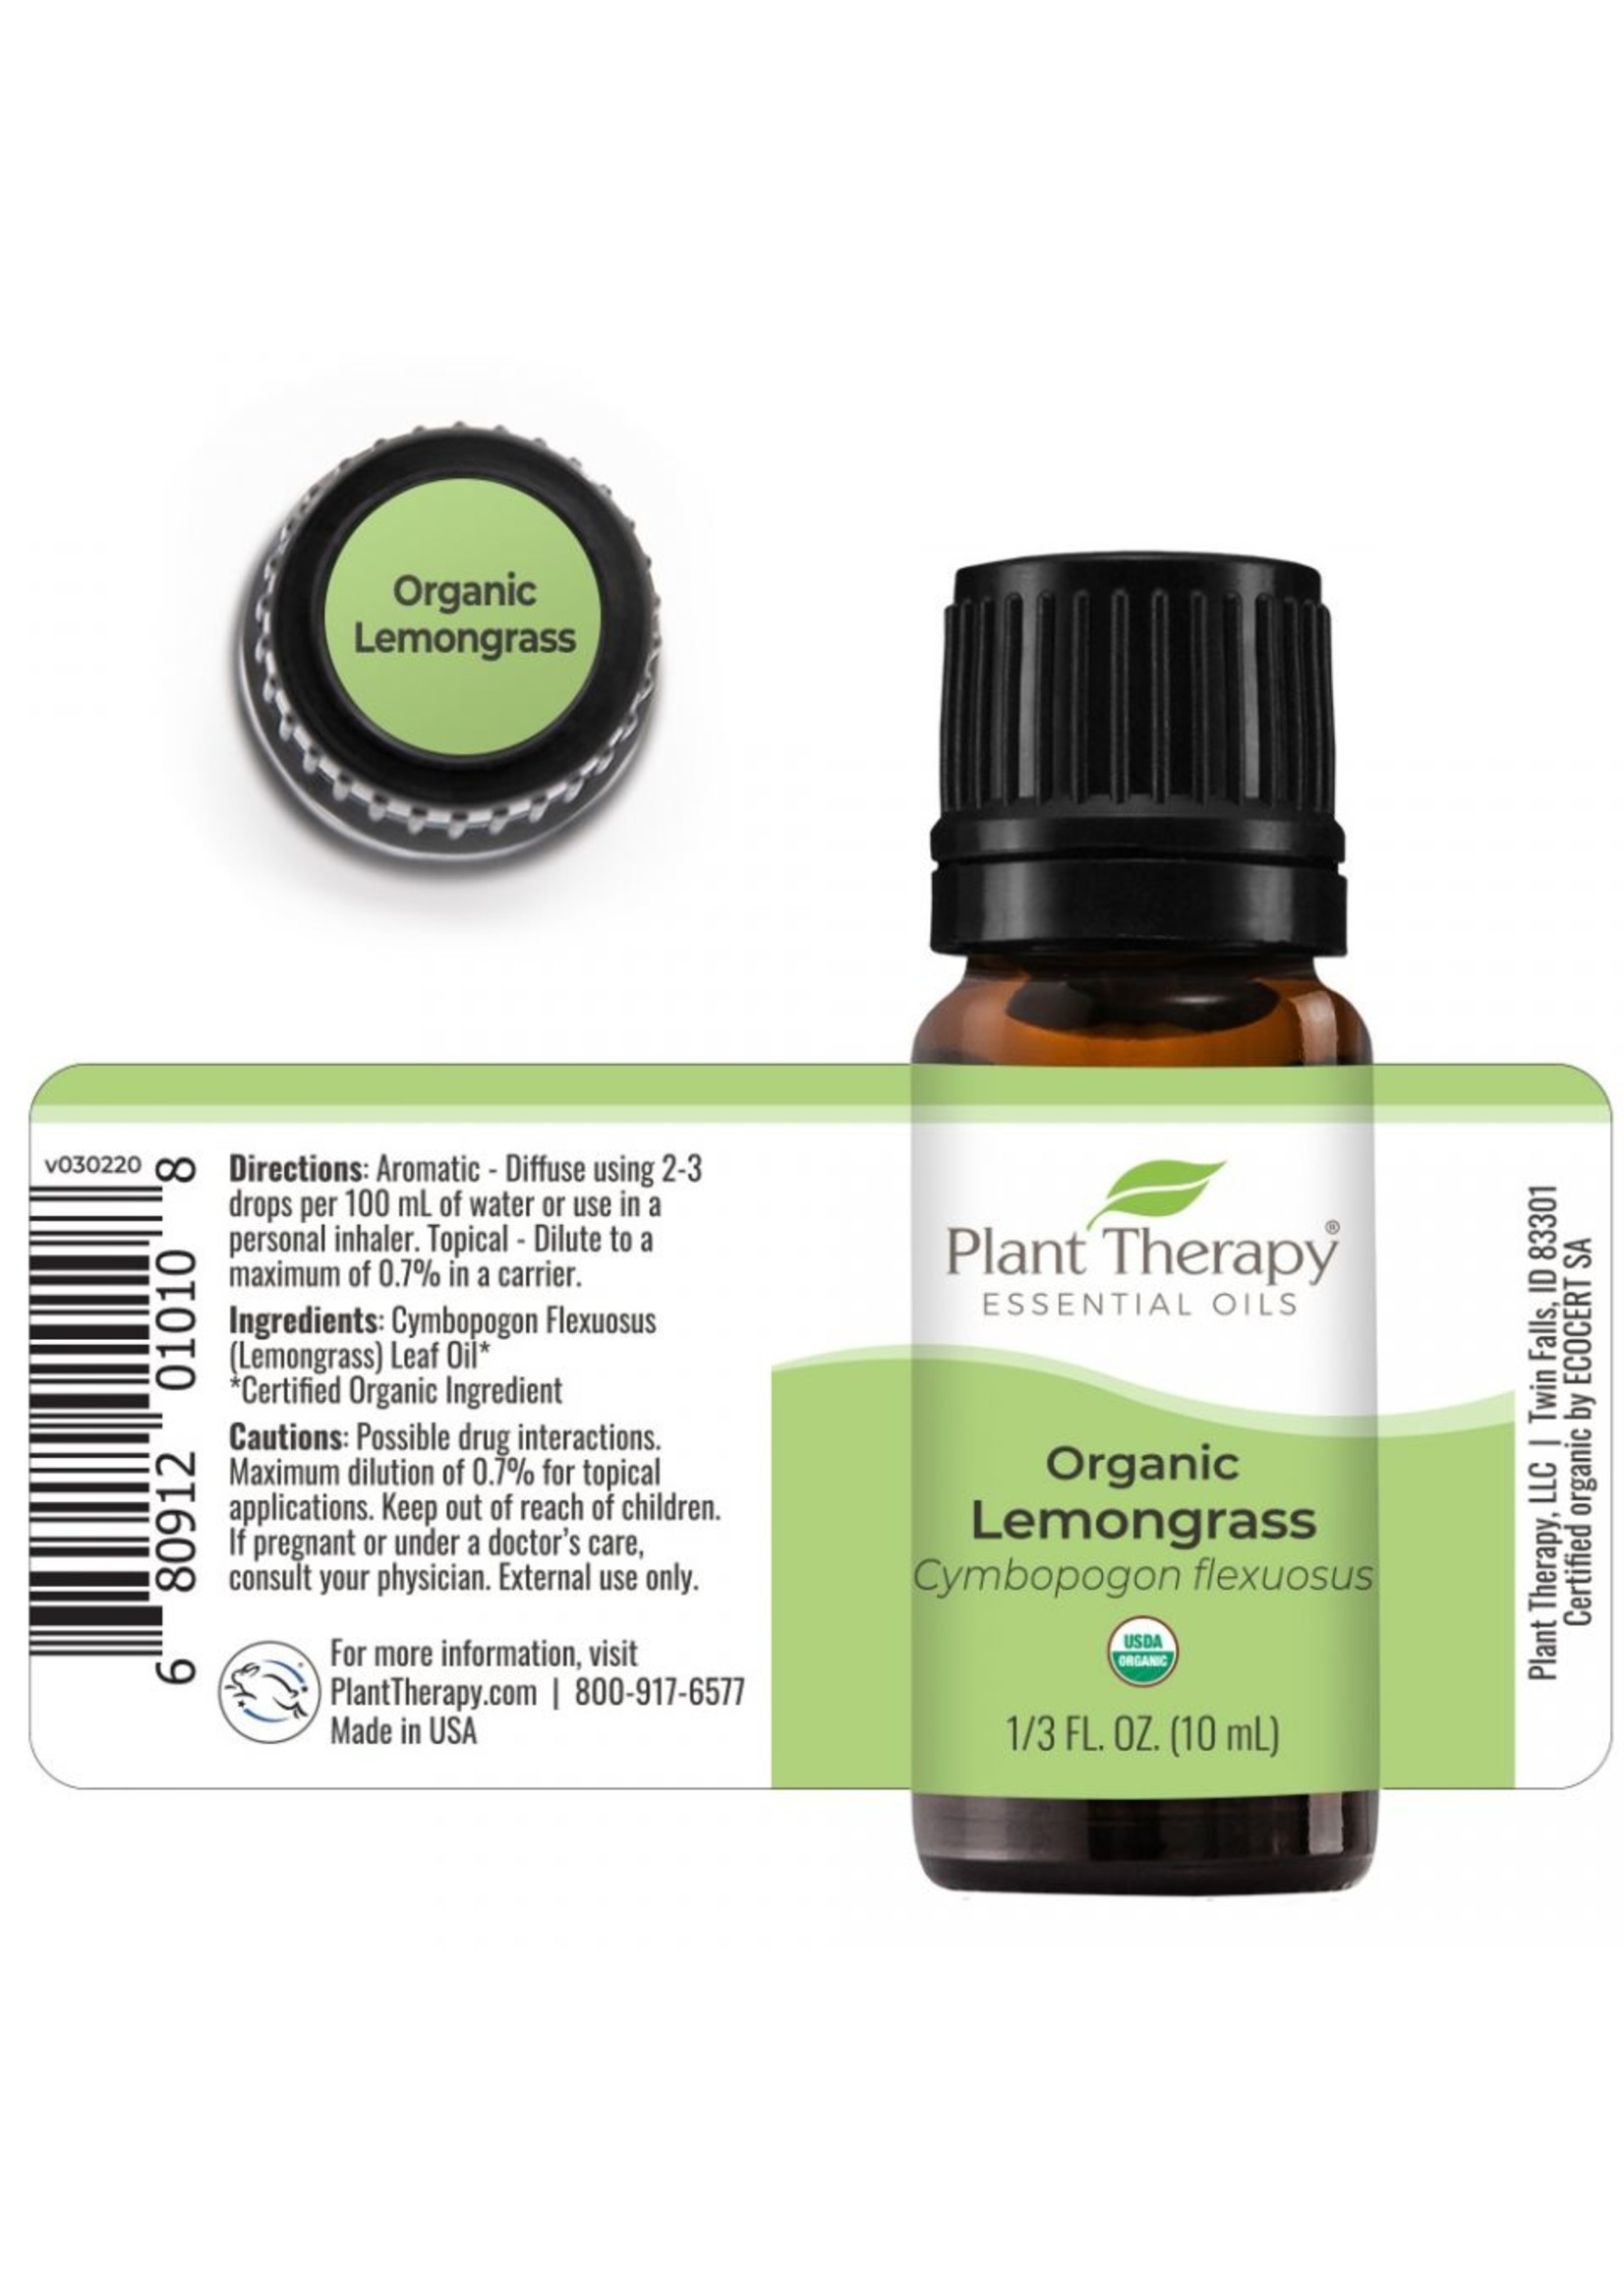 Plant Therapy Organic Lemongrass Essential Oil